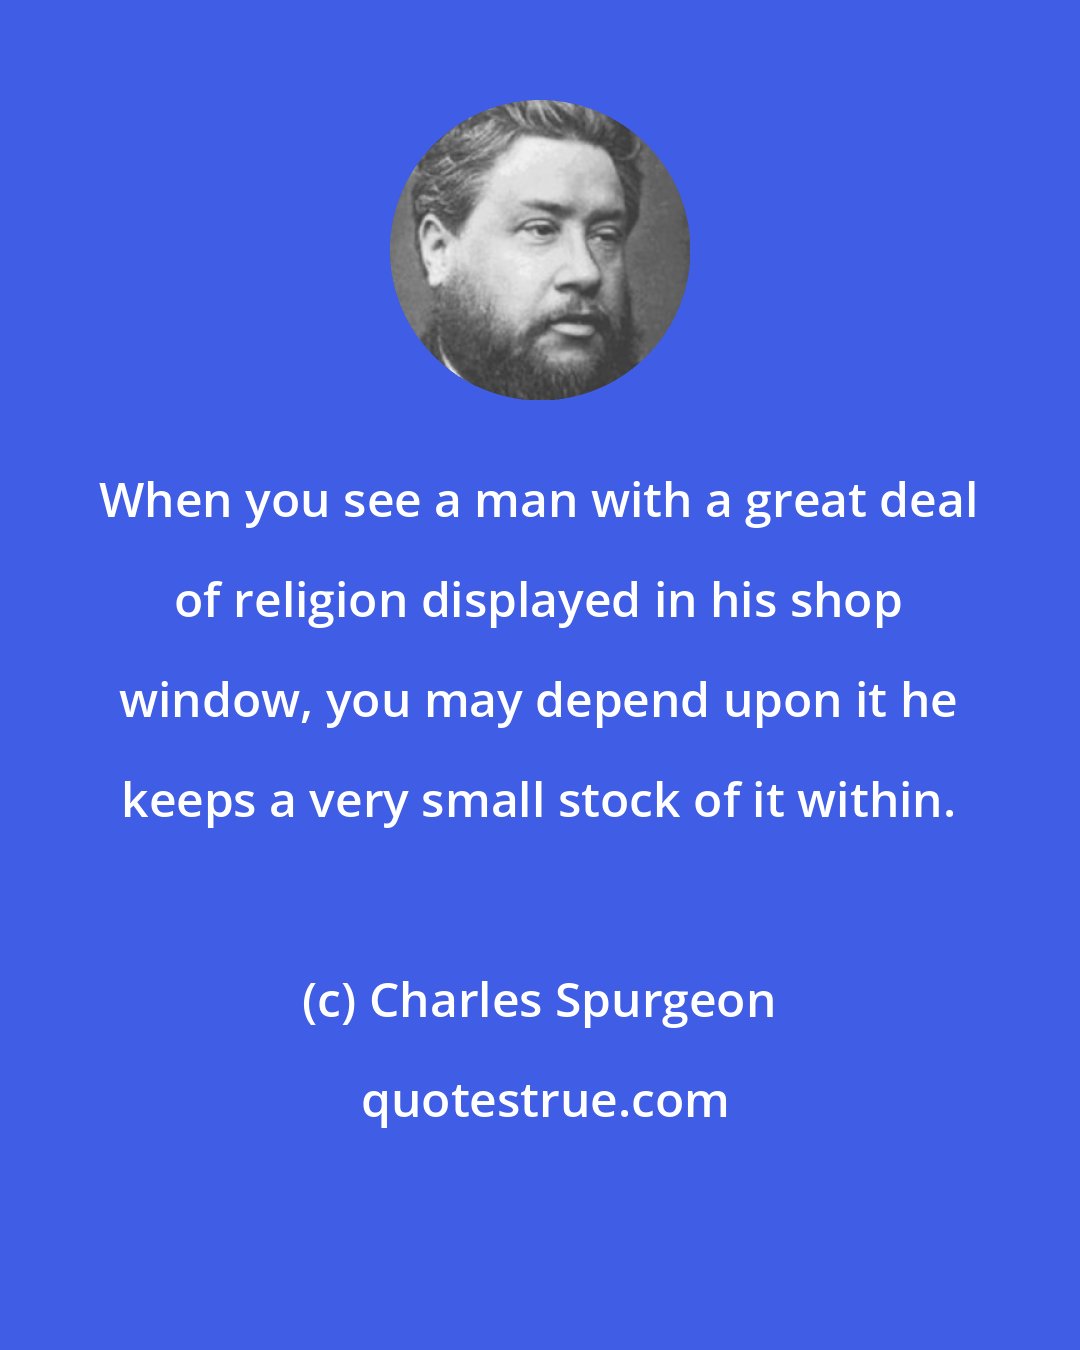 Charles Spurgeon: When you see a man with a great deal of religion displayed in his shop window, you may depend upon it he keeps a very small stock of it within.